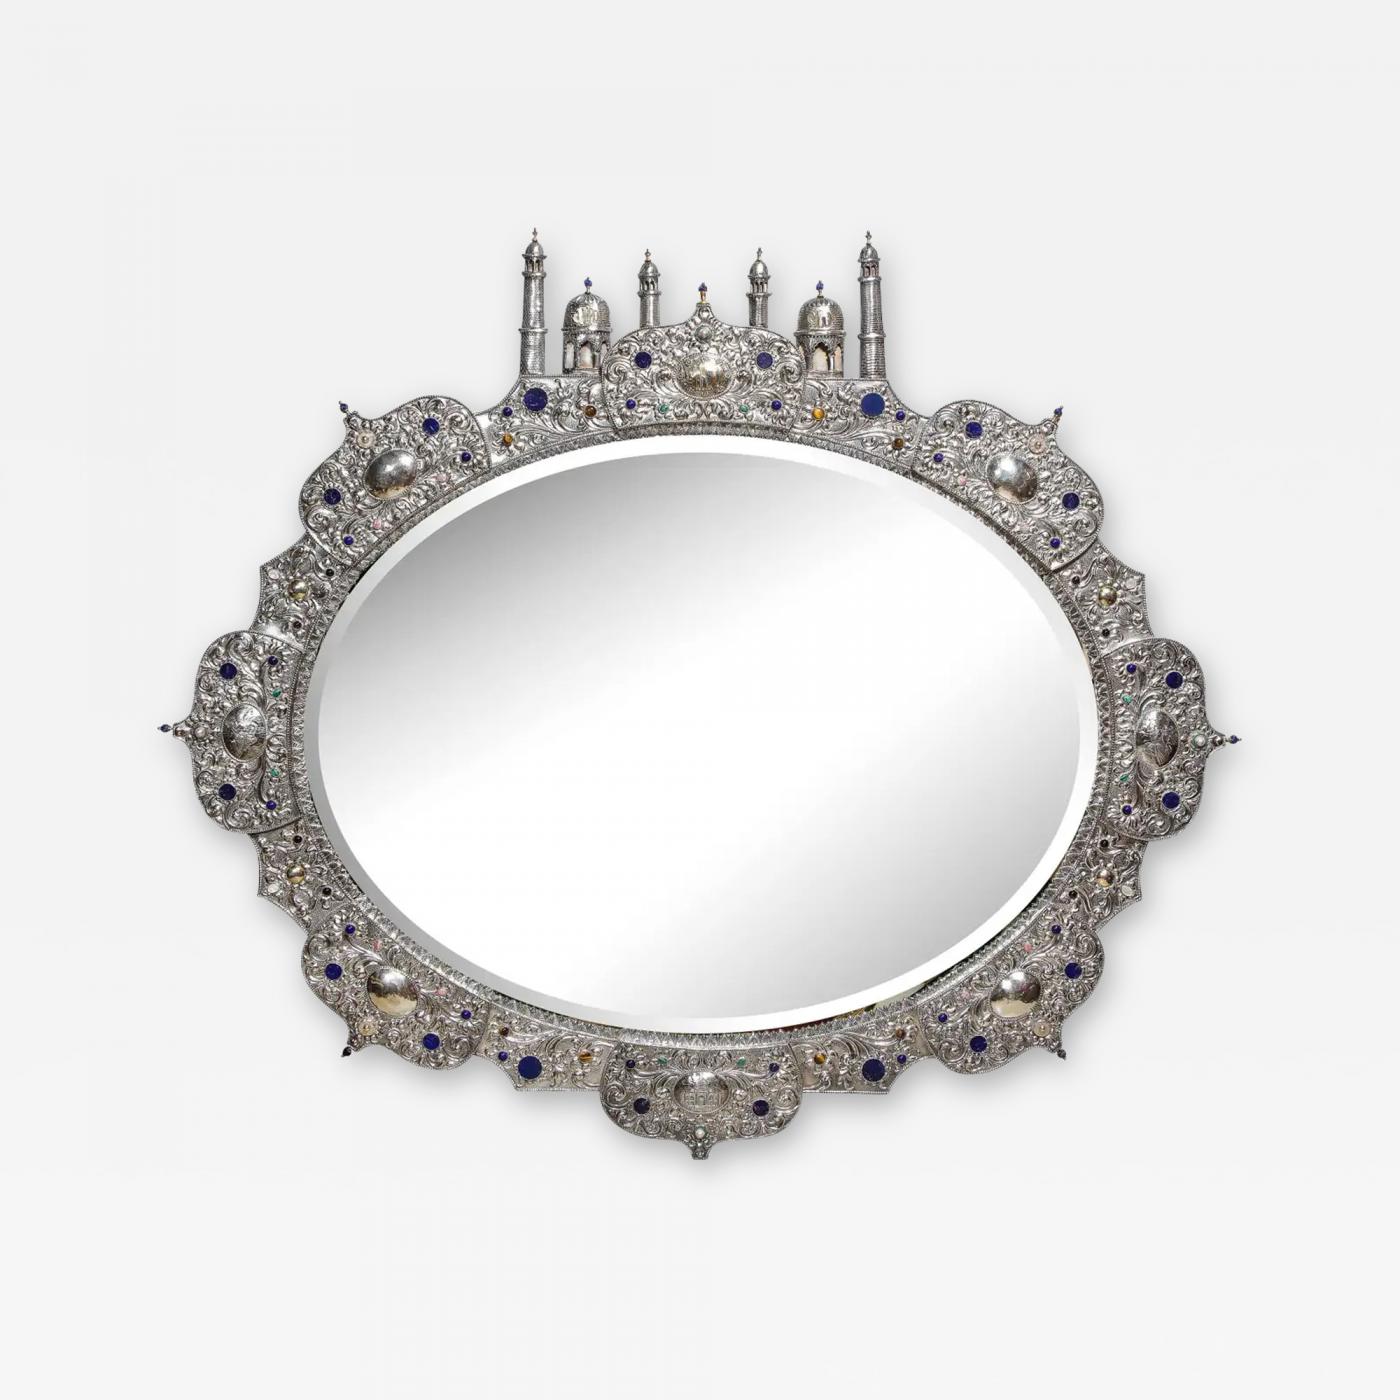 Rare and Magnificent Indian Silver, Gold & Jeweled Palace Mirror